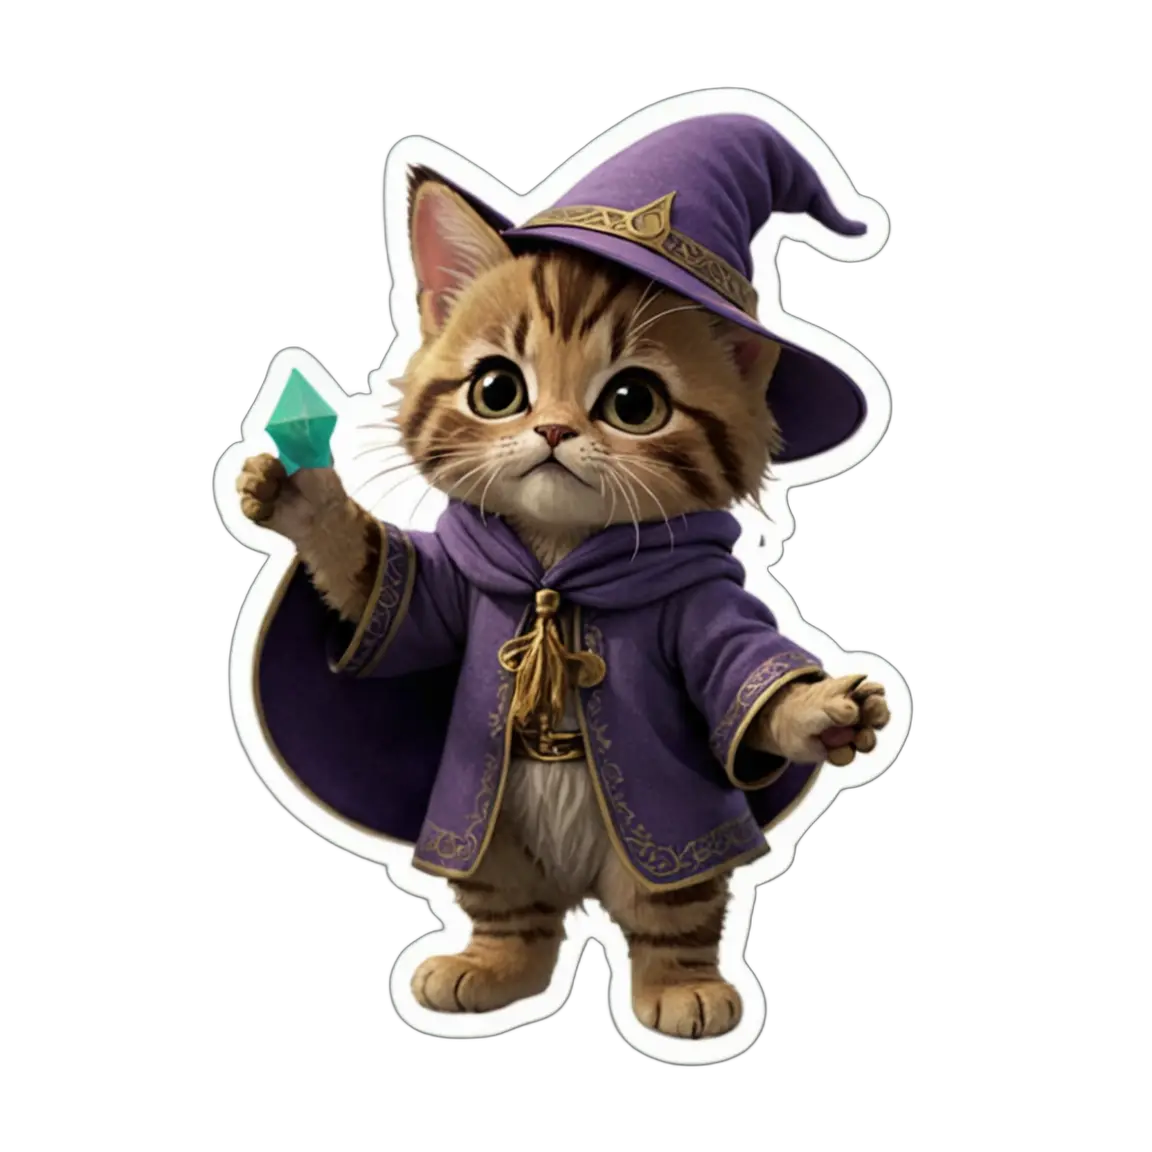 a cute cat wearing wizard outfit, pixar style [WITH REFERENCE IMAGE]